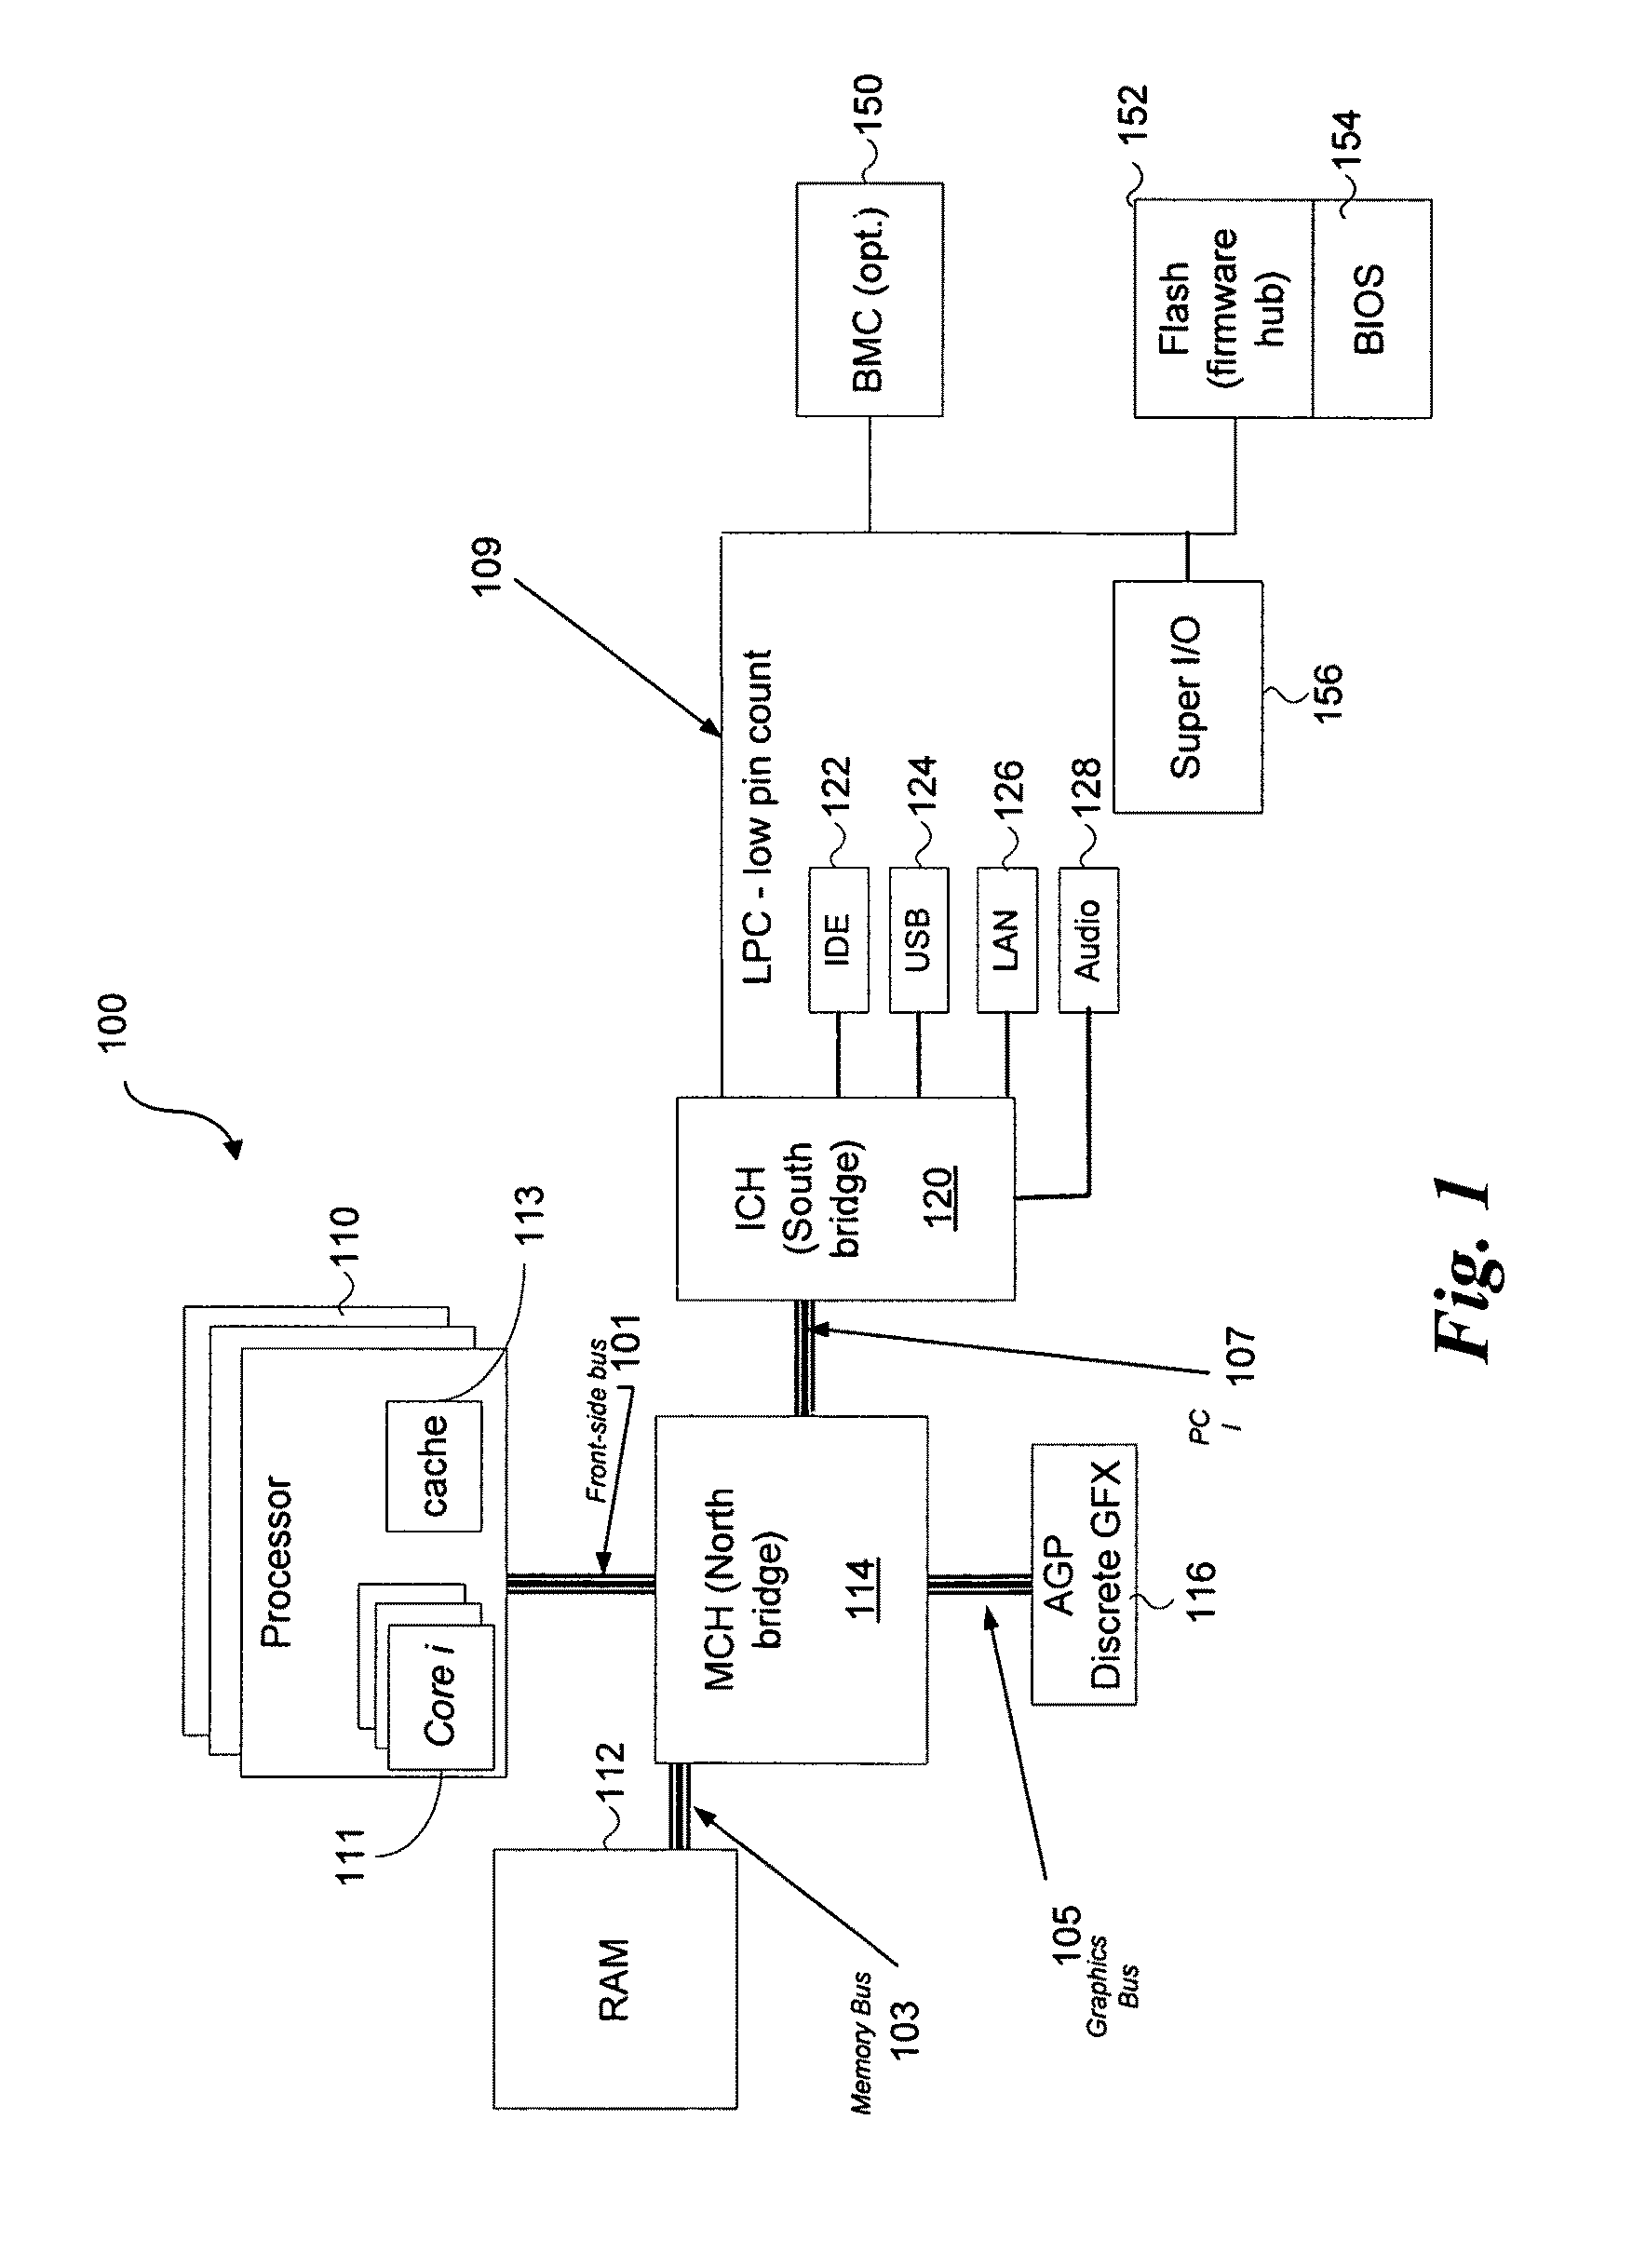 System and method for memory bandwidth friendly sorting on multi-core architectures